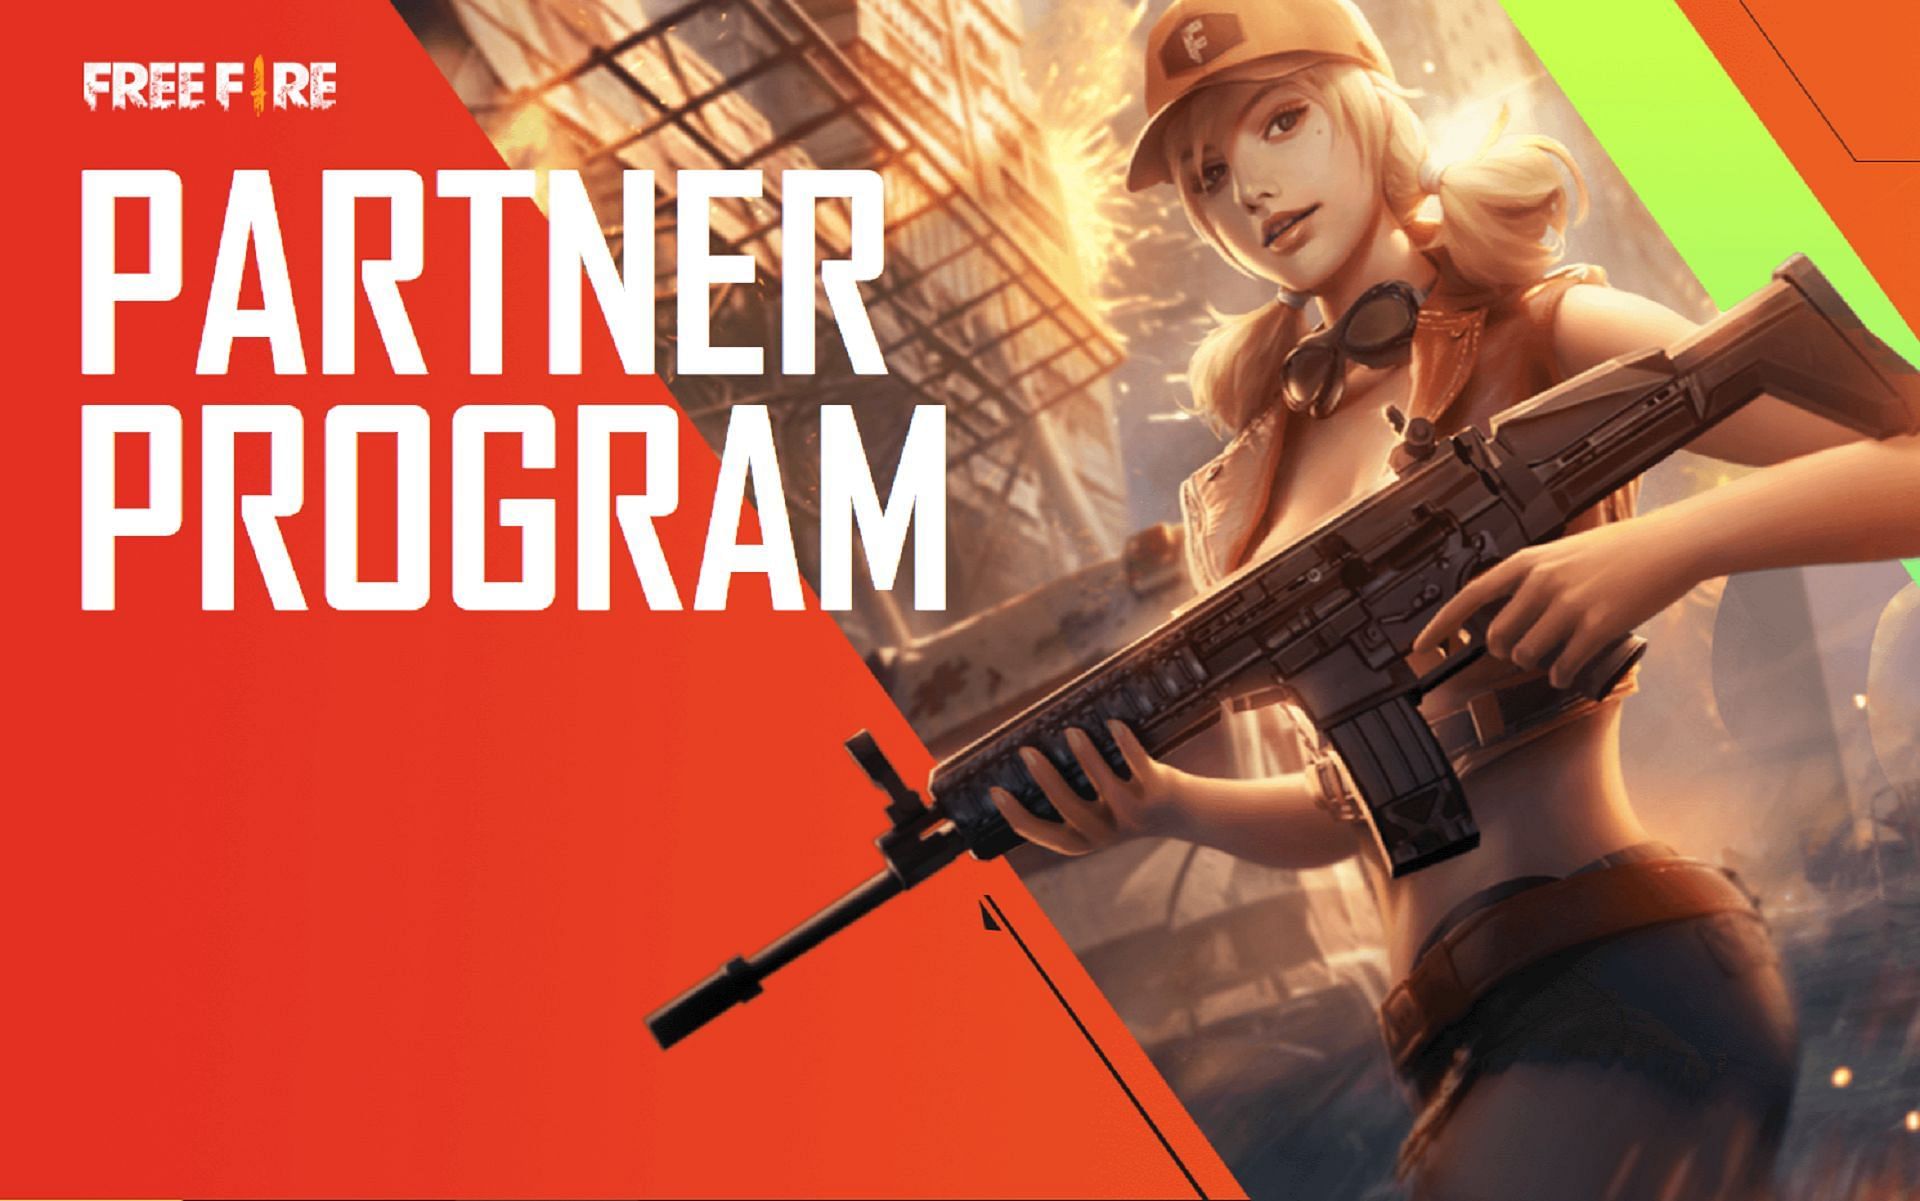 Free Fire Partner Program is not accepting responses at the moment (Image via Garena)